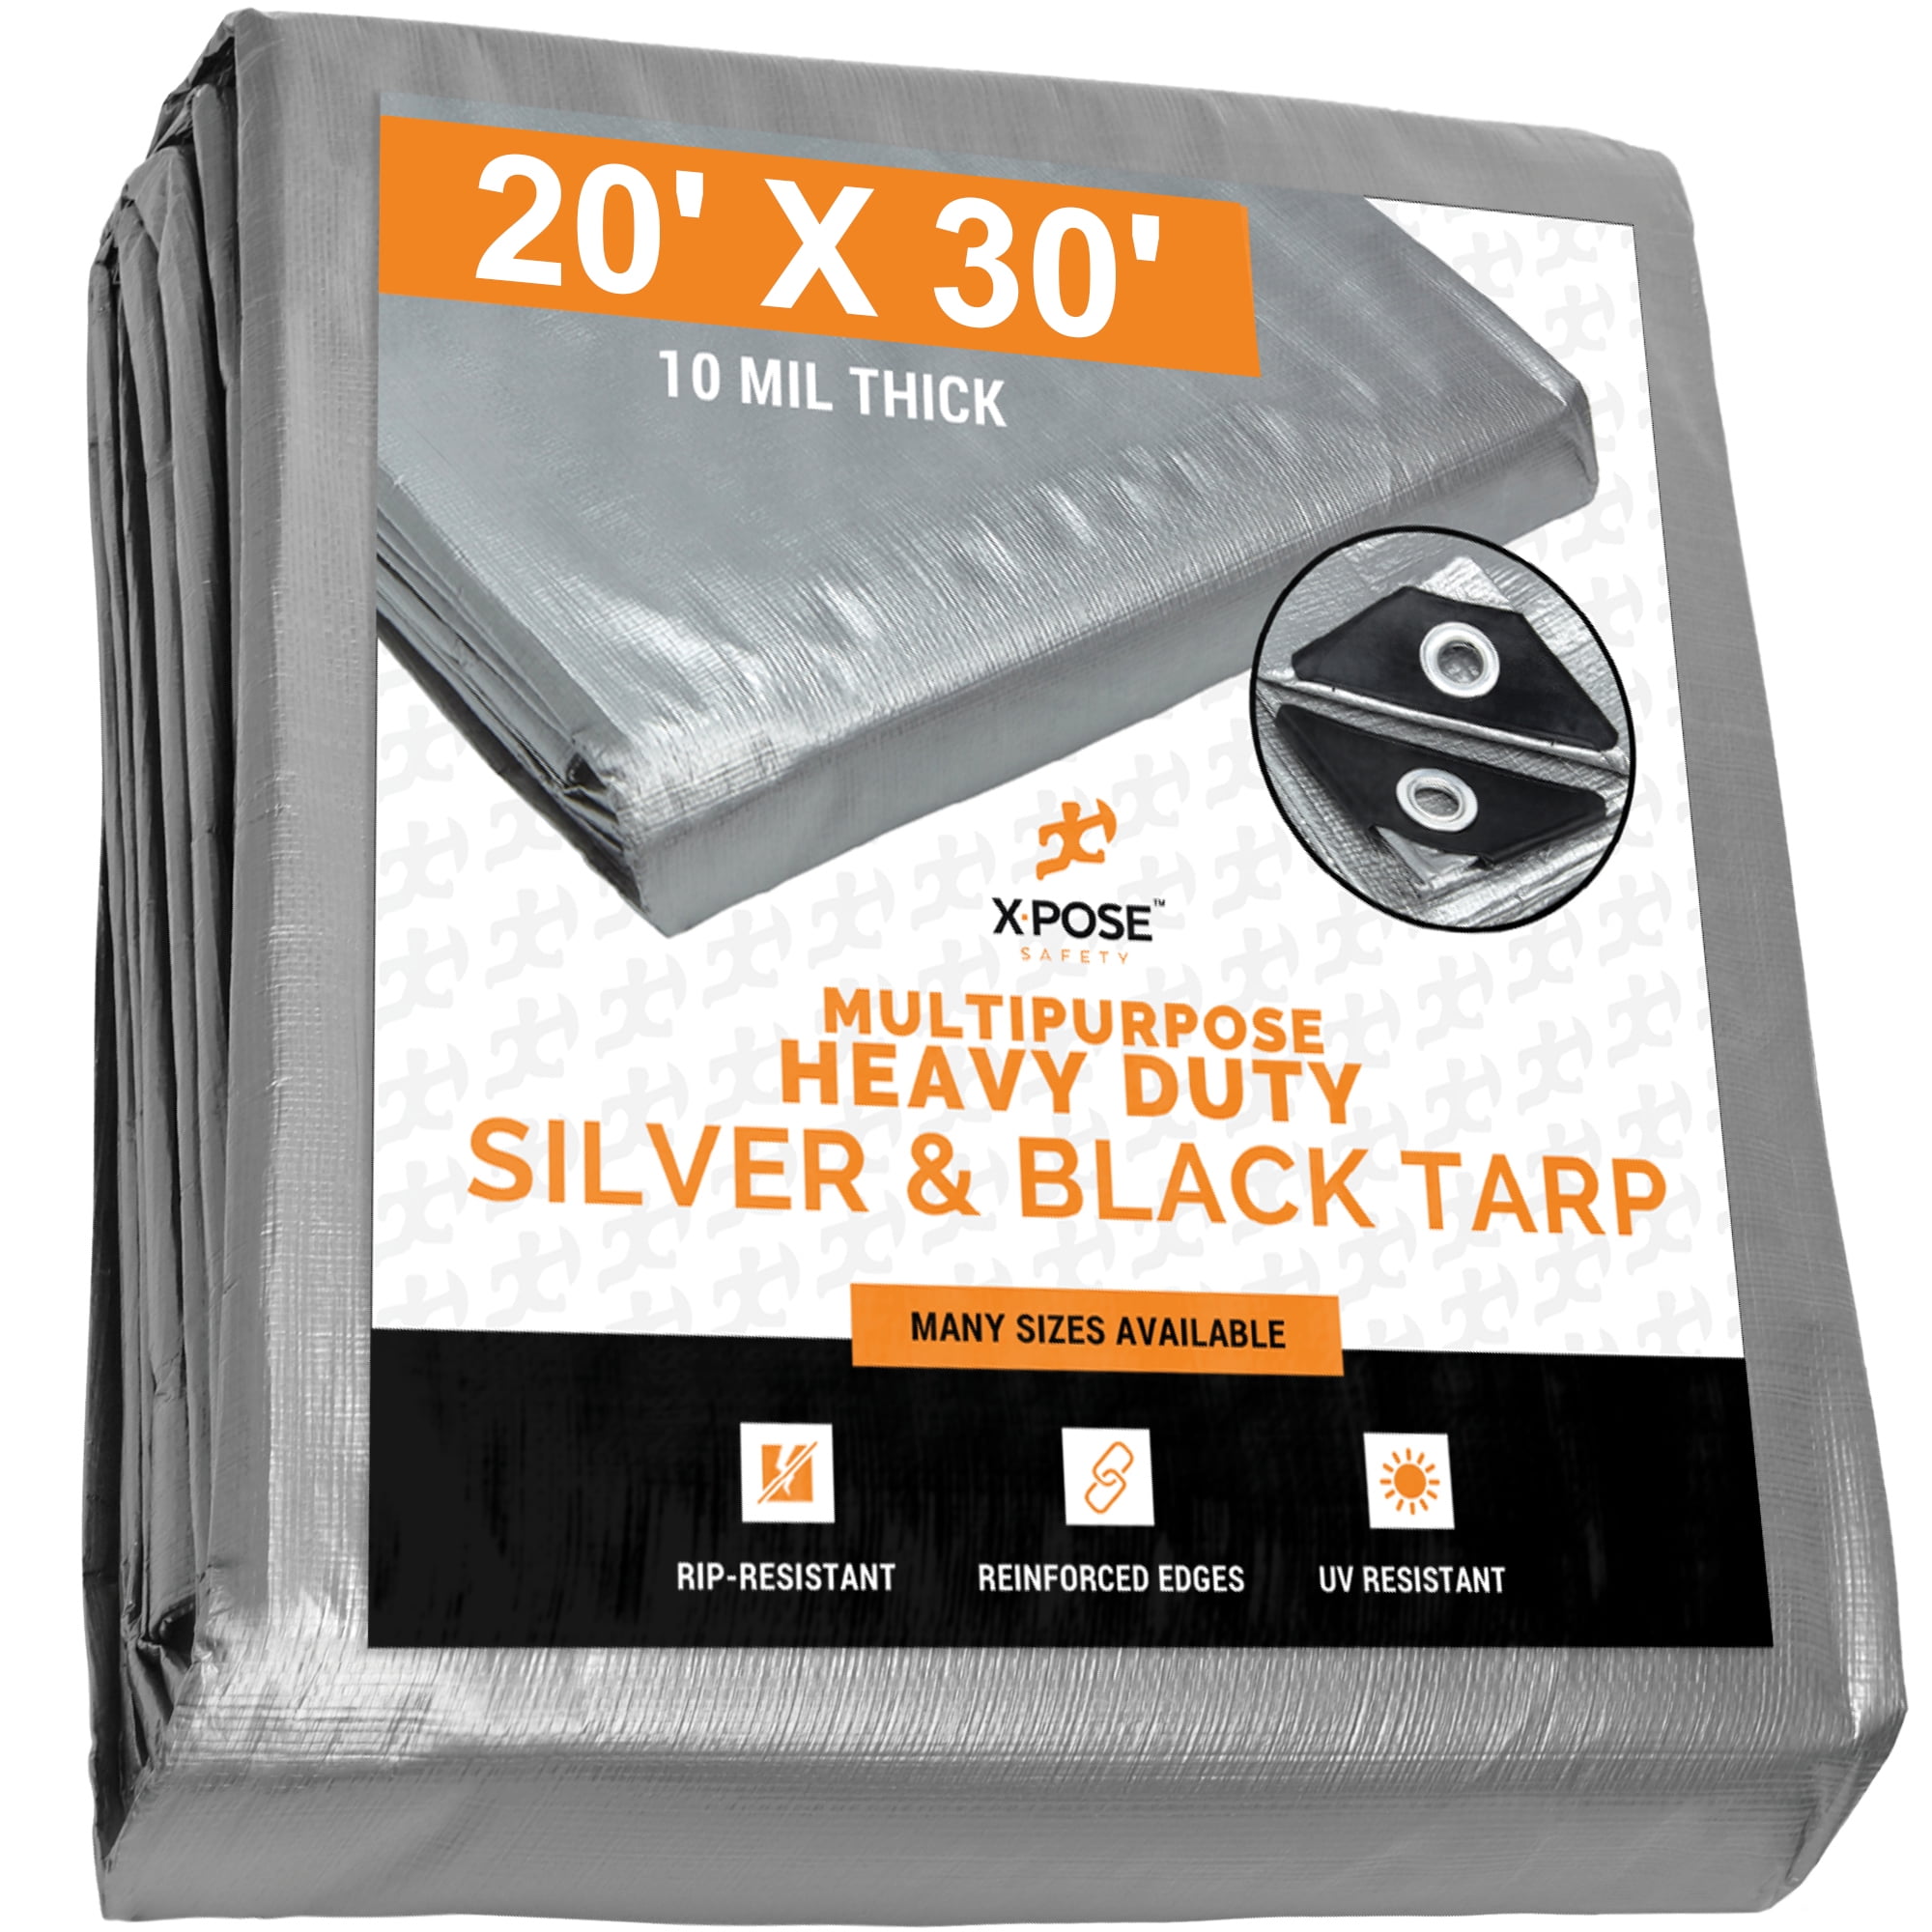 X-pose Safety Heavy Duty Poly Tarp - 20' x 30' - 10 Mil Thick